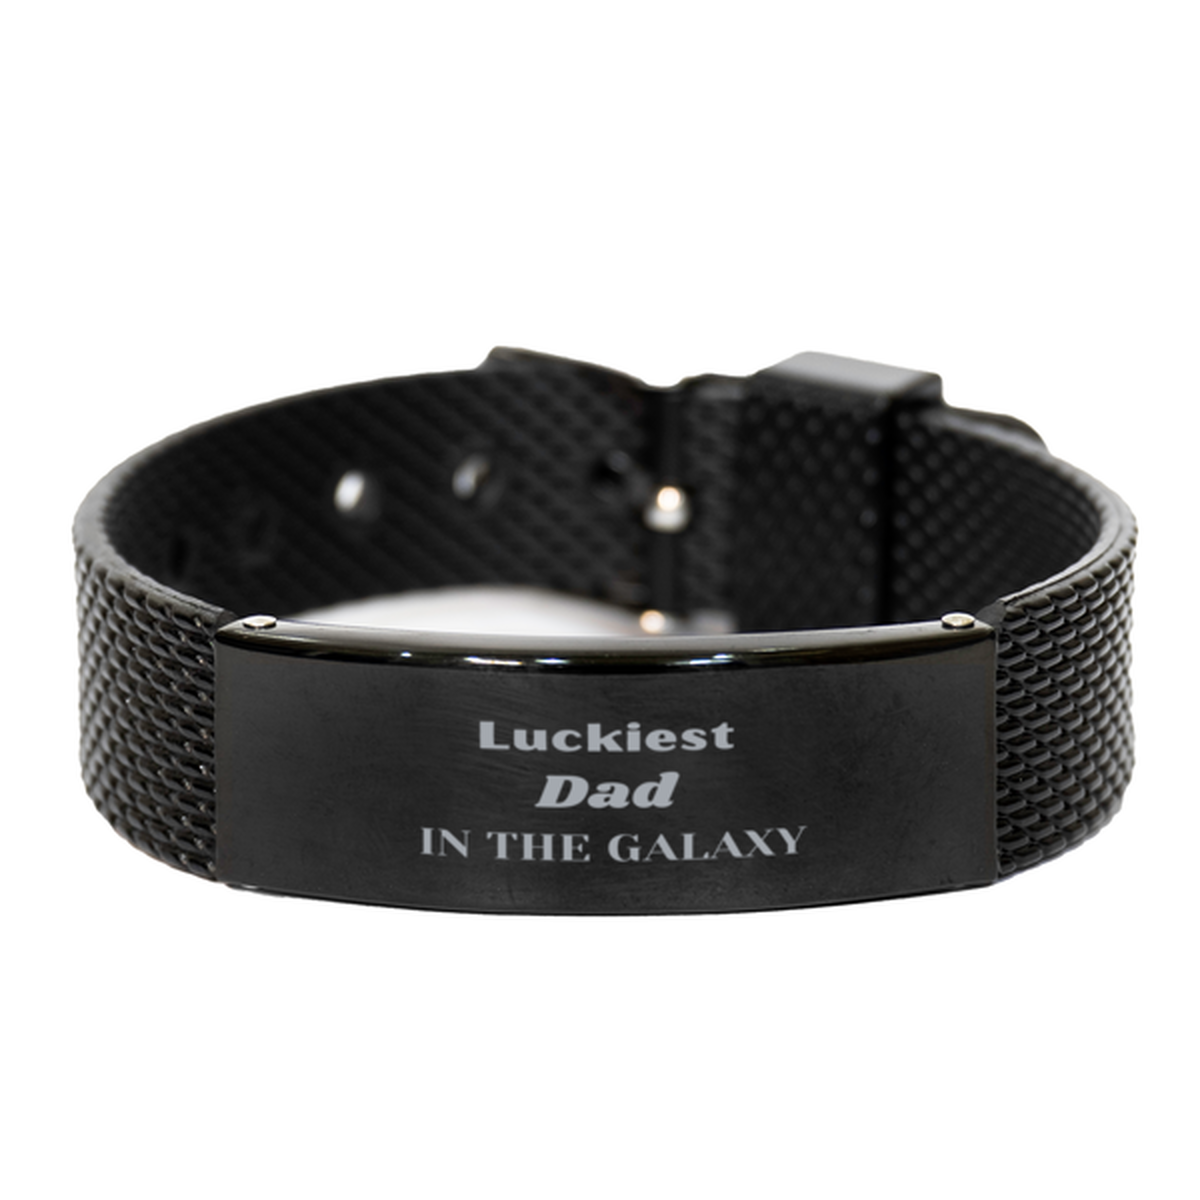 Luckiest Dad in the Galaxy, To My Dad Engraved Gifts, Christmas Dad Black Shark Mesh Bracelet Gifts, X-mas Birthday Unique Gifts For Dad Men Women